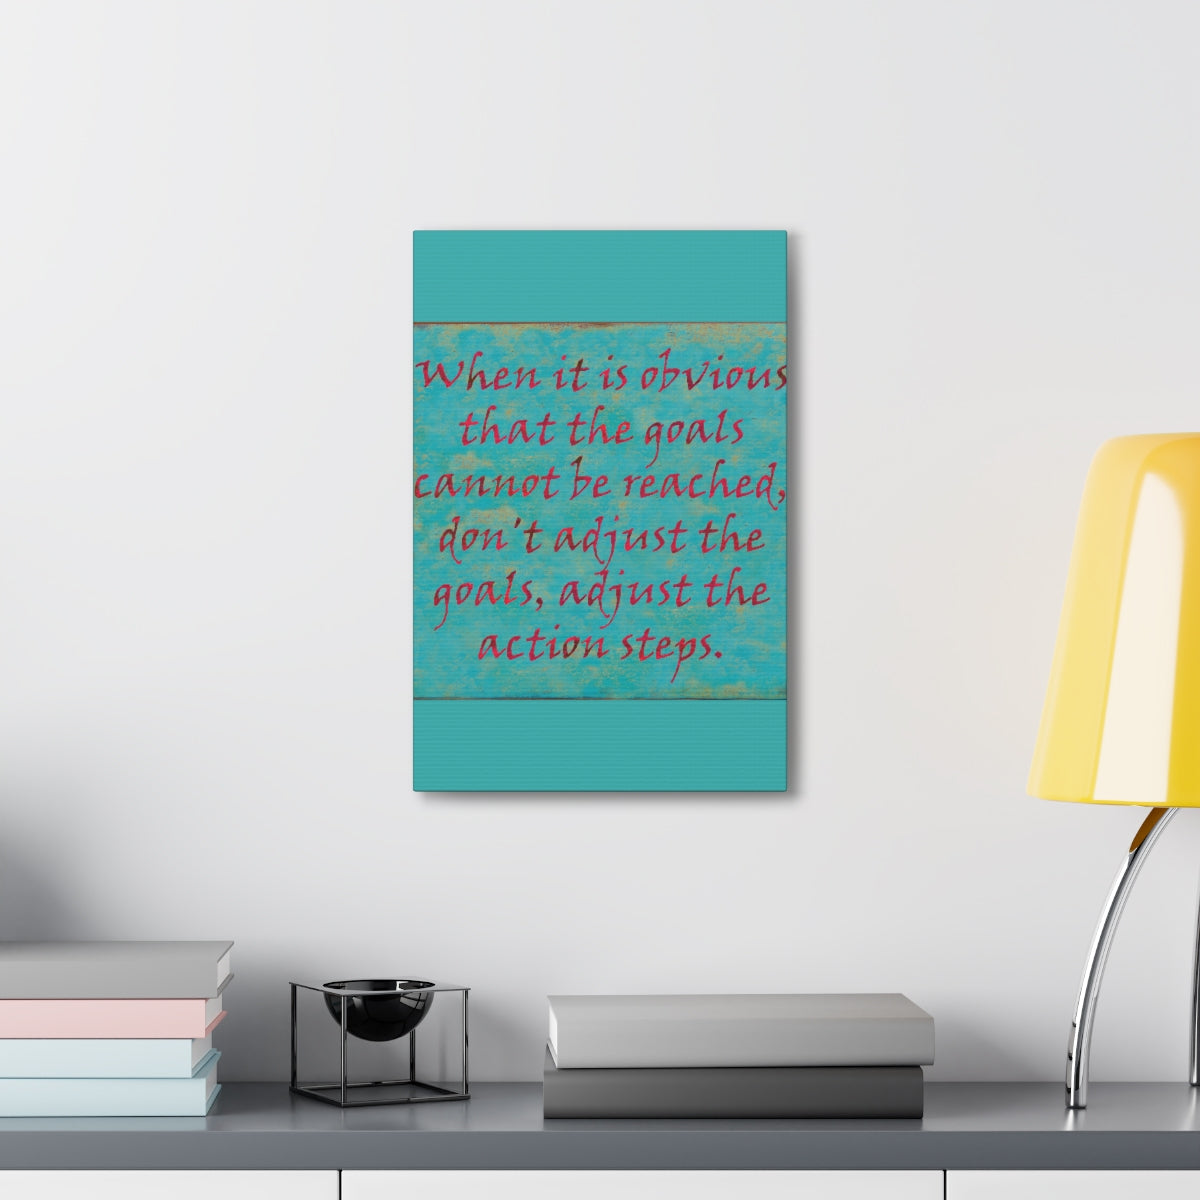 Scripture Walls Inspirational Wall Art Adjust Action Step Motivation Wall Decor for Home Office Gym Inspiring Success Quote Print Ready to Hang Unframed-Express Your Love Gifts